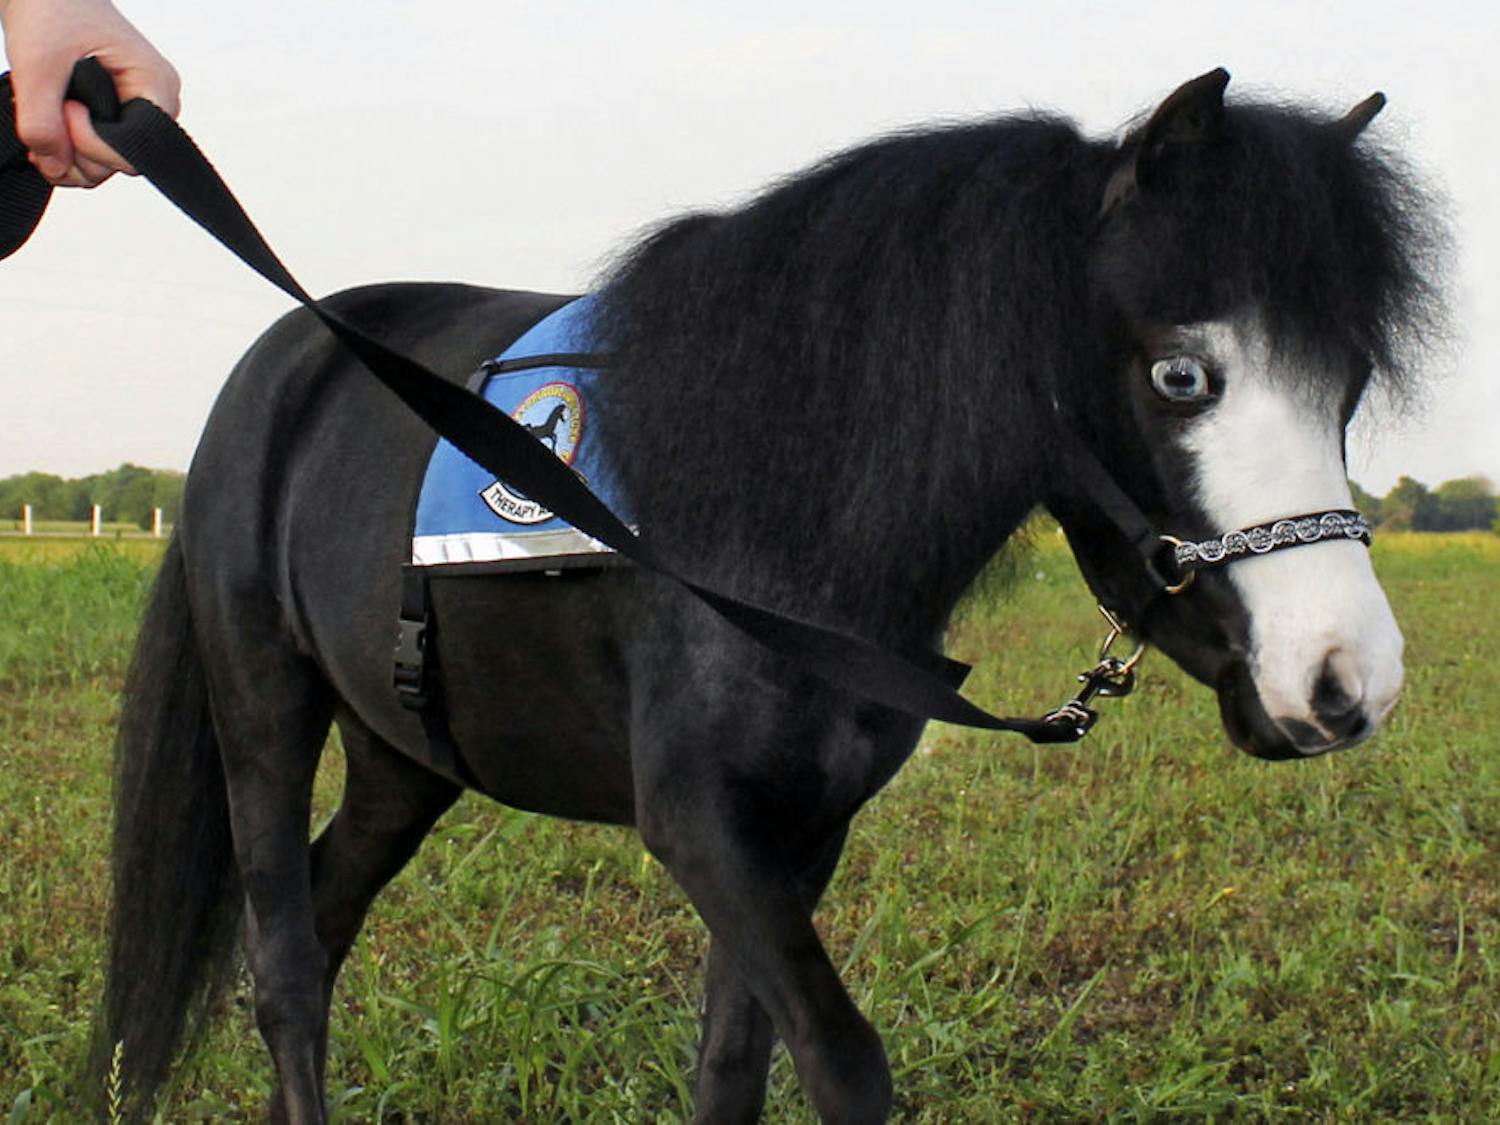 Magic, the 8-year-old American Miniature horse, stands in a field while on a walk. Magic, who is a therapy horse, was inducted into the U.S. Equestrian Foundation’s Horse Stars Hall of Fame for her inspirational impact on the public.